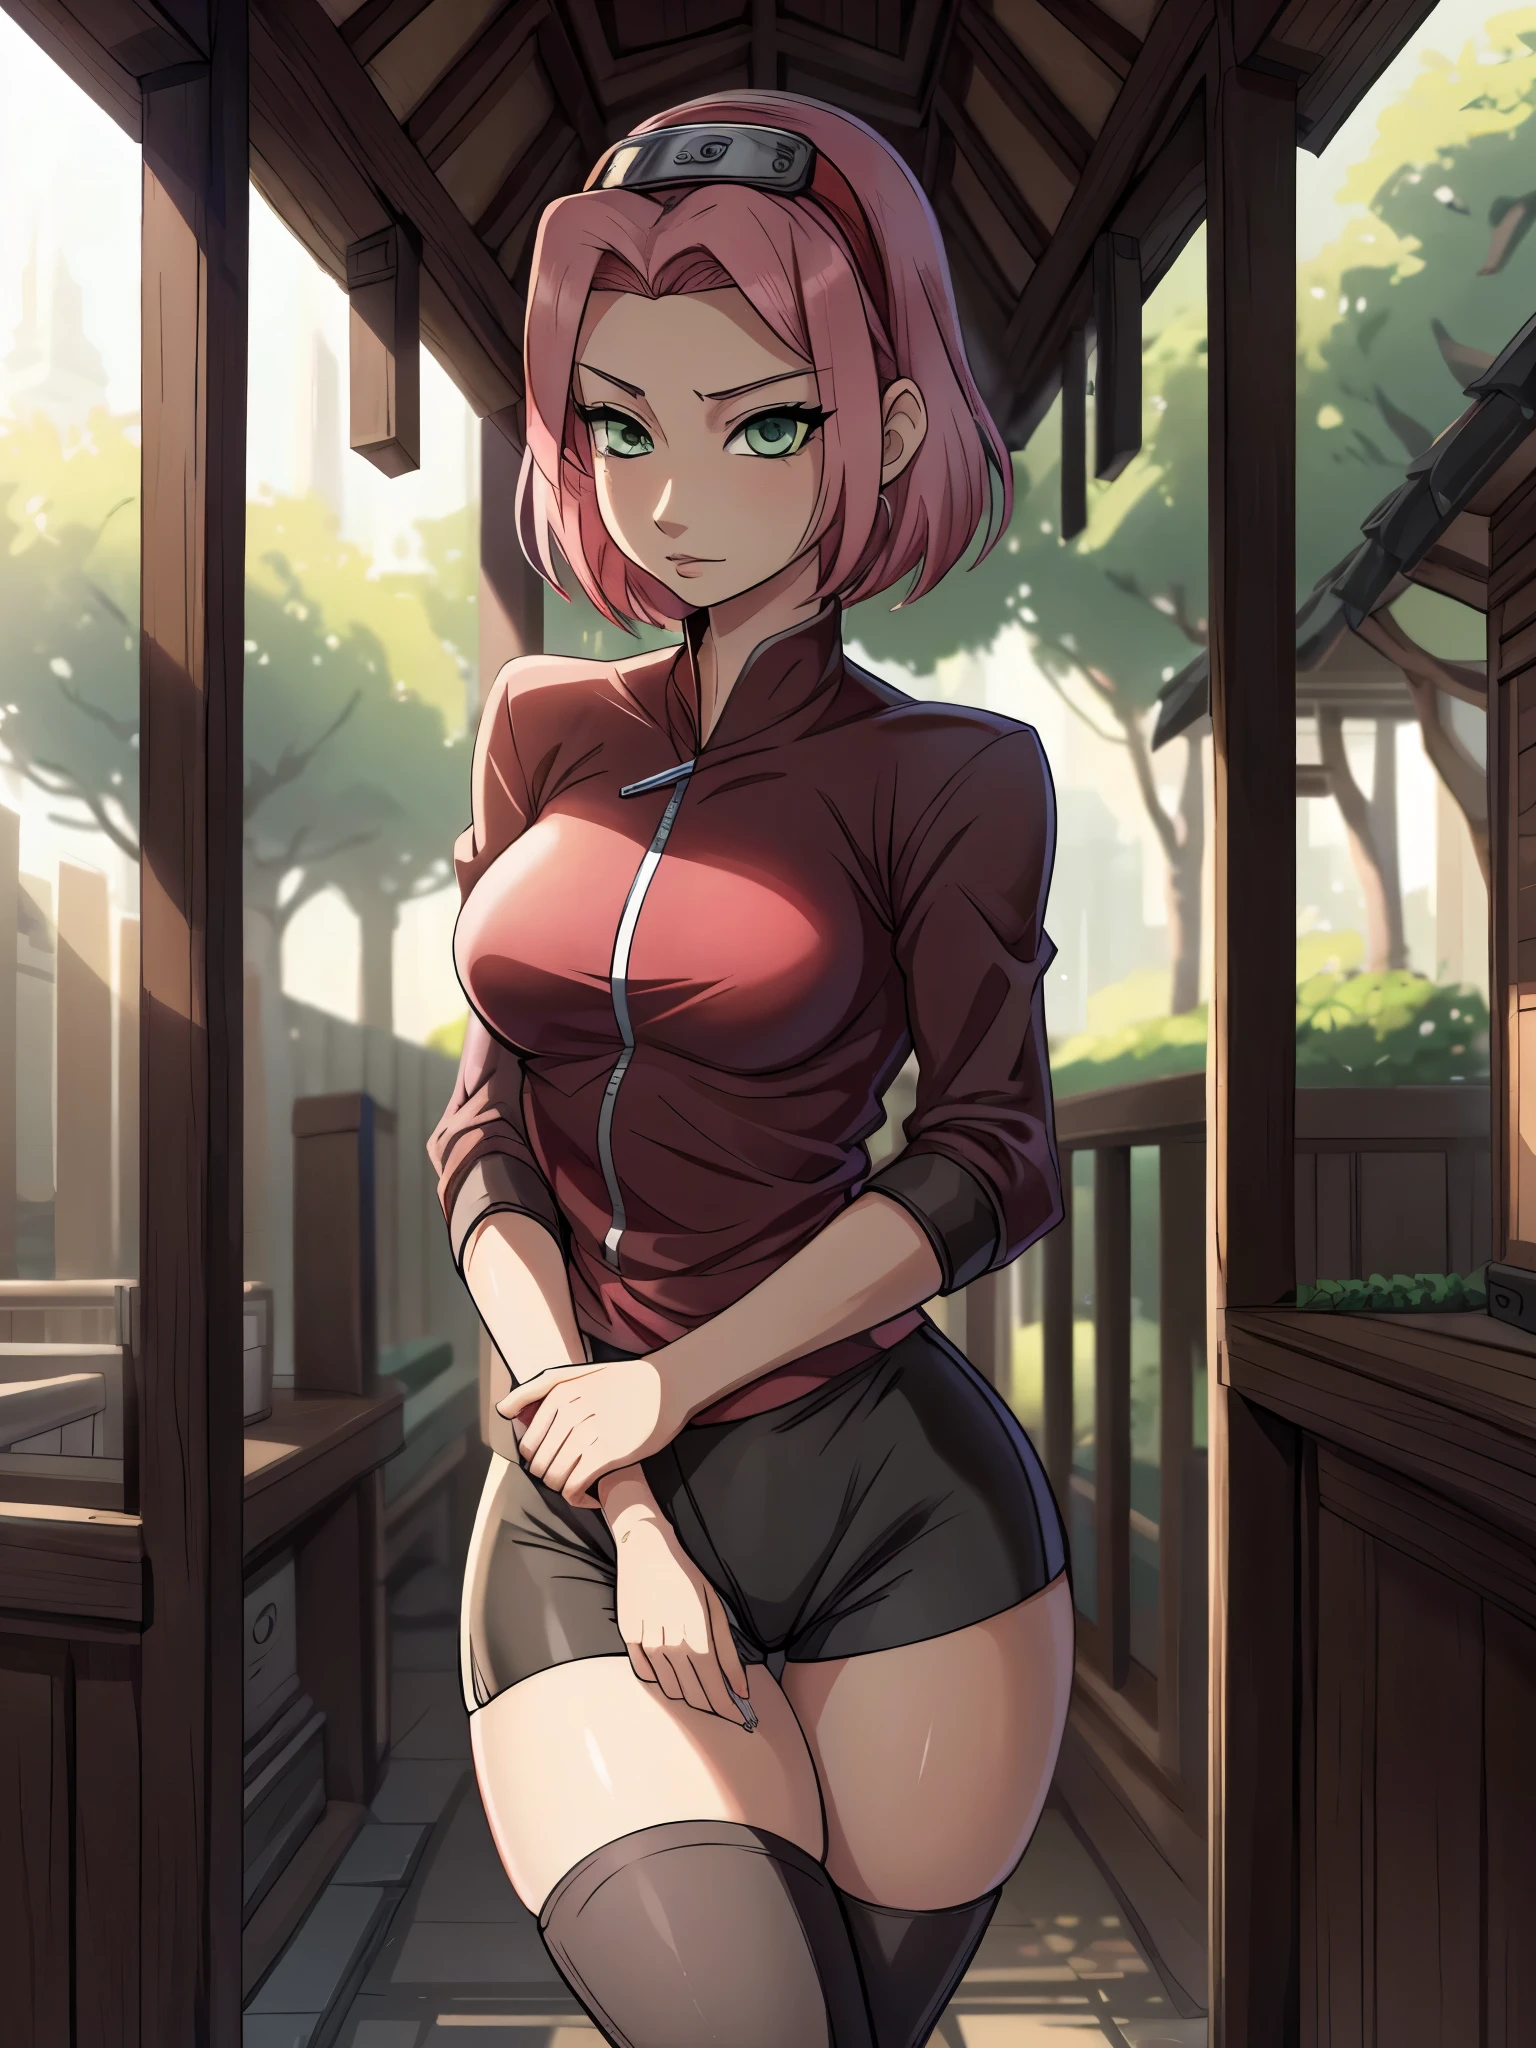 ((ultra quality)), ((masterpiece)), haruno sakuro, naruto, ((pink short hair)), (beautiful cute face), (beautiful female lips), charming, ((sexy facial expression)), looks at the camera, eyes slightly open, (skin color white), (blue skin), glare on the body, ((detailed beautiful female eyes)), ((green eyes)), (juicy female lips), (black eyeliner), (beautiful female hands), ((ideal female figure)), ideal female body, beautiful waist, gorgeous thighs, beautiful small breasts, ((subtle and beautiful)), stands temptingly (close up of face), (sakura haruno clothing, black tight shorts, Hidden Leaf Village Shinobi Clothes) background: hidden leaf village, Naruto Shippuden, ((depth of field)), ((high quality clear image)), (clear details), ((high detail)), realistically, professional photo session, ((Clear Focus)), anime